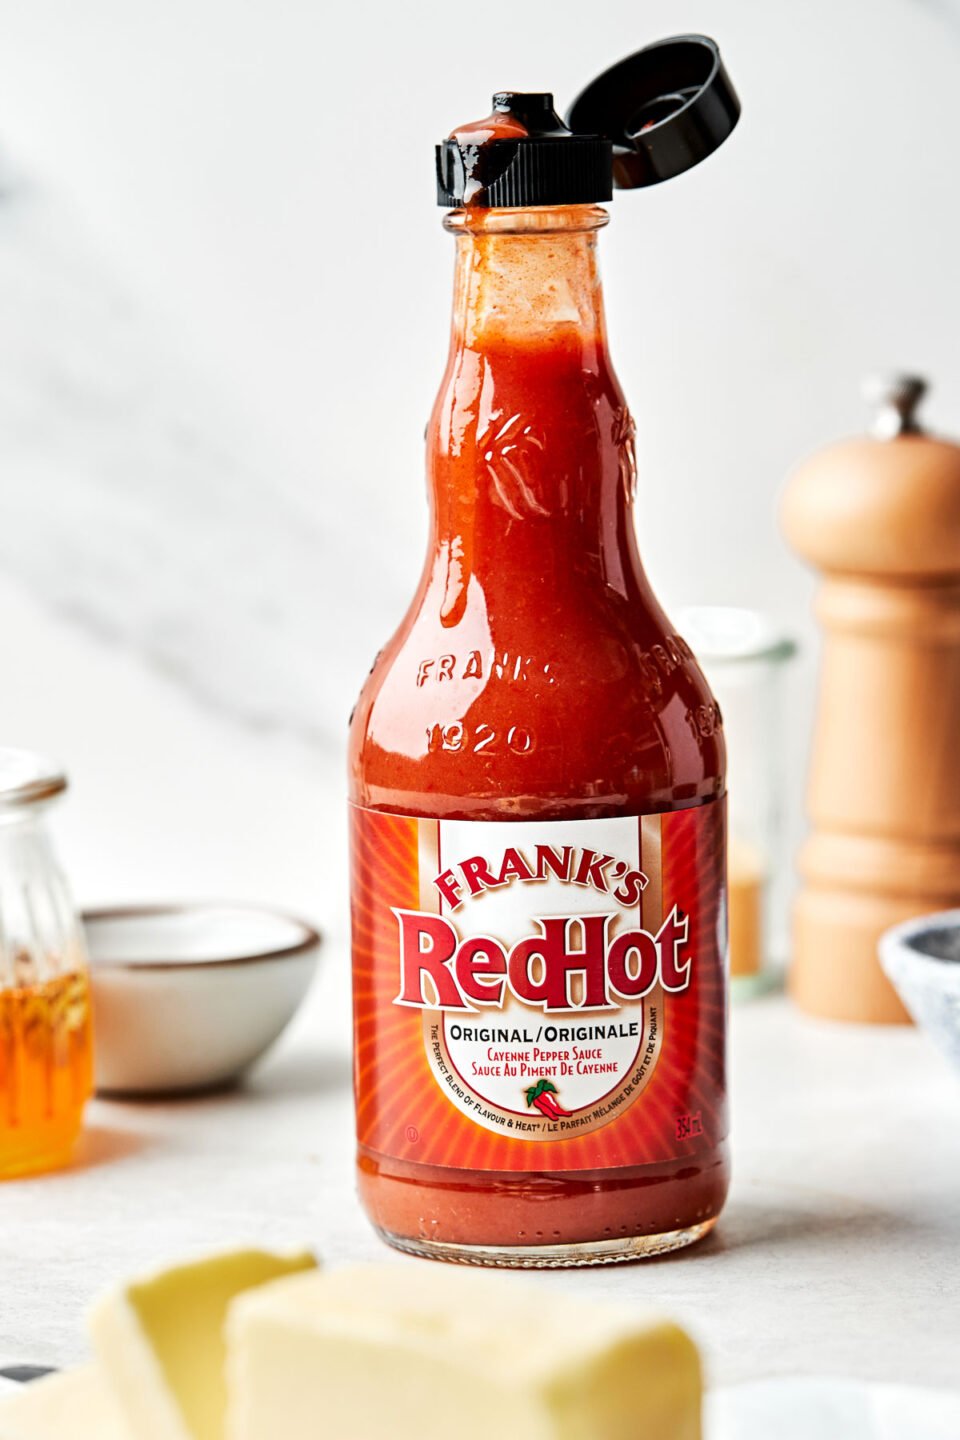 A side shot of a glass bottle of Franks Red Hot on a white surface in front of a white background.